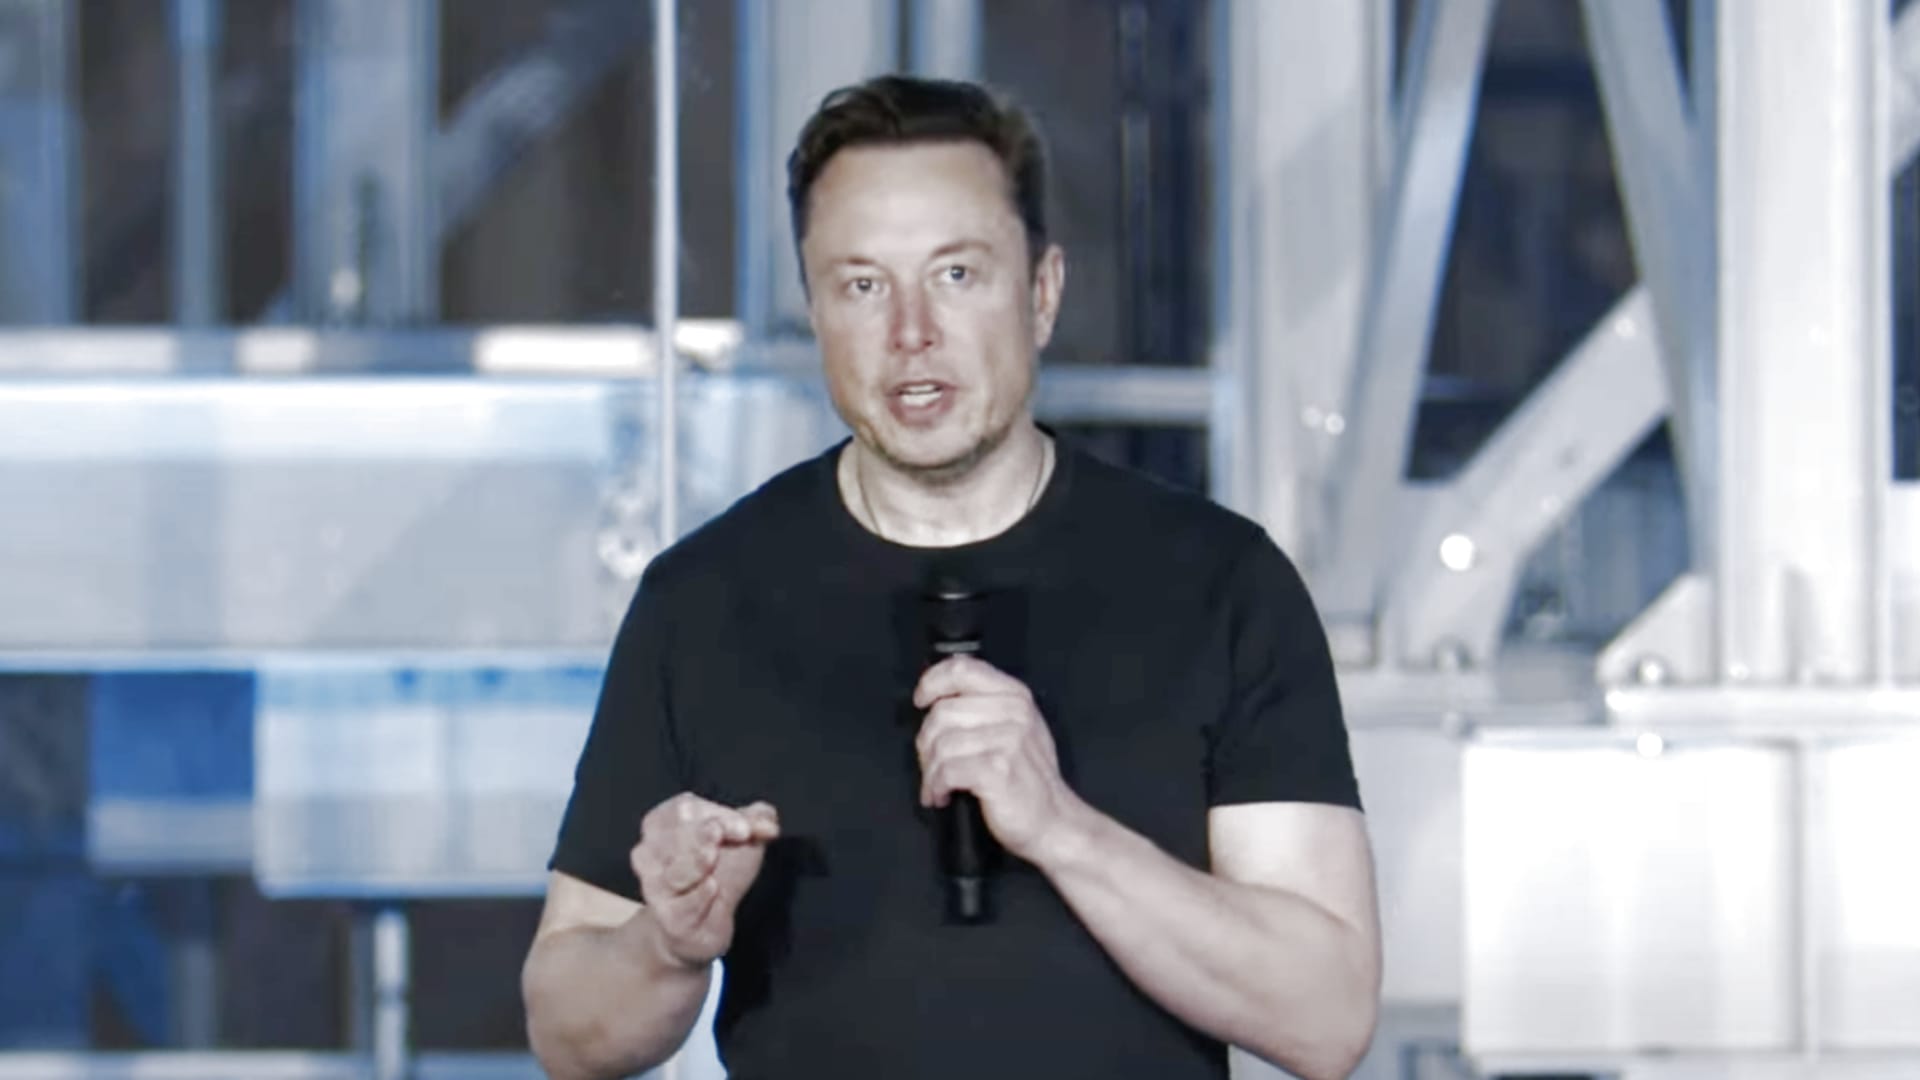 Tesla investor day featured 17 execs, taking Musk out of limelight